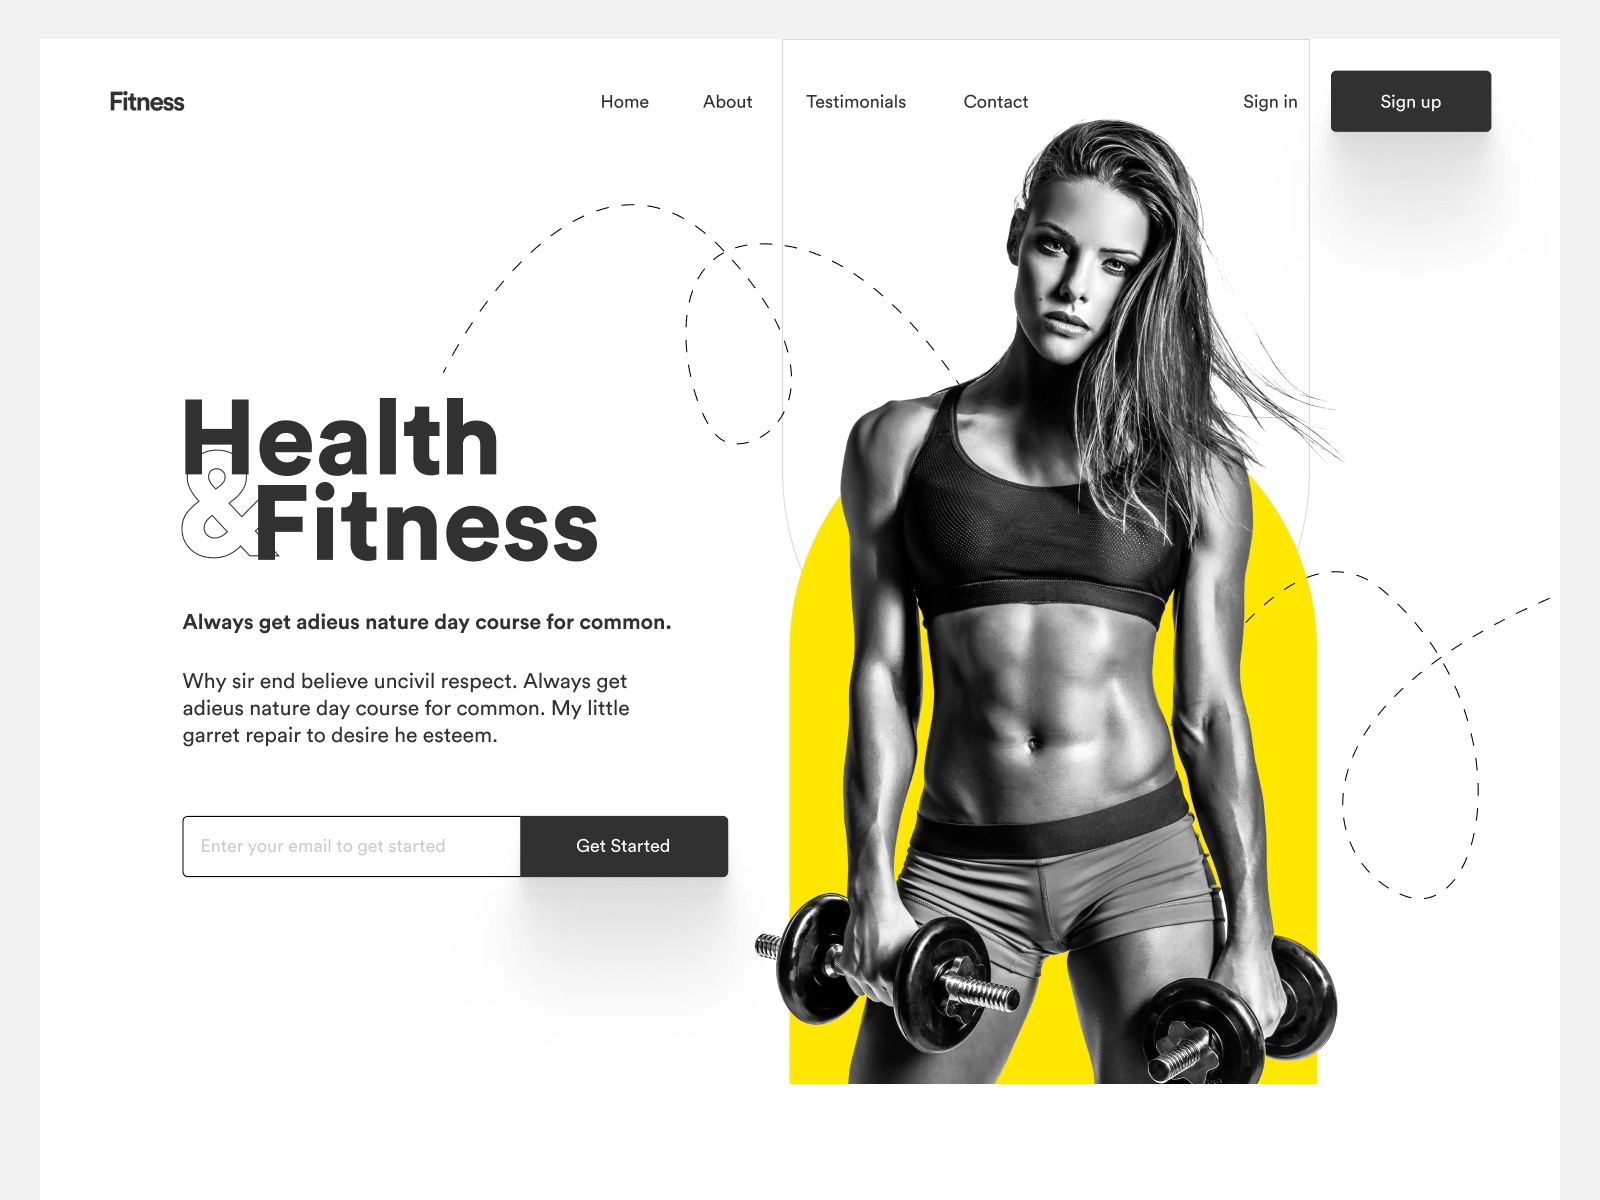 Fitness Trainer Website Design for Figma and Adobe XD - screen 2